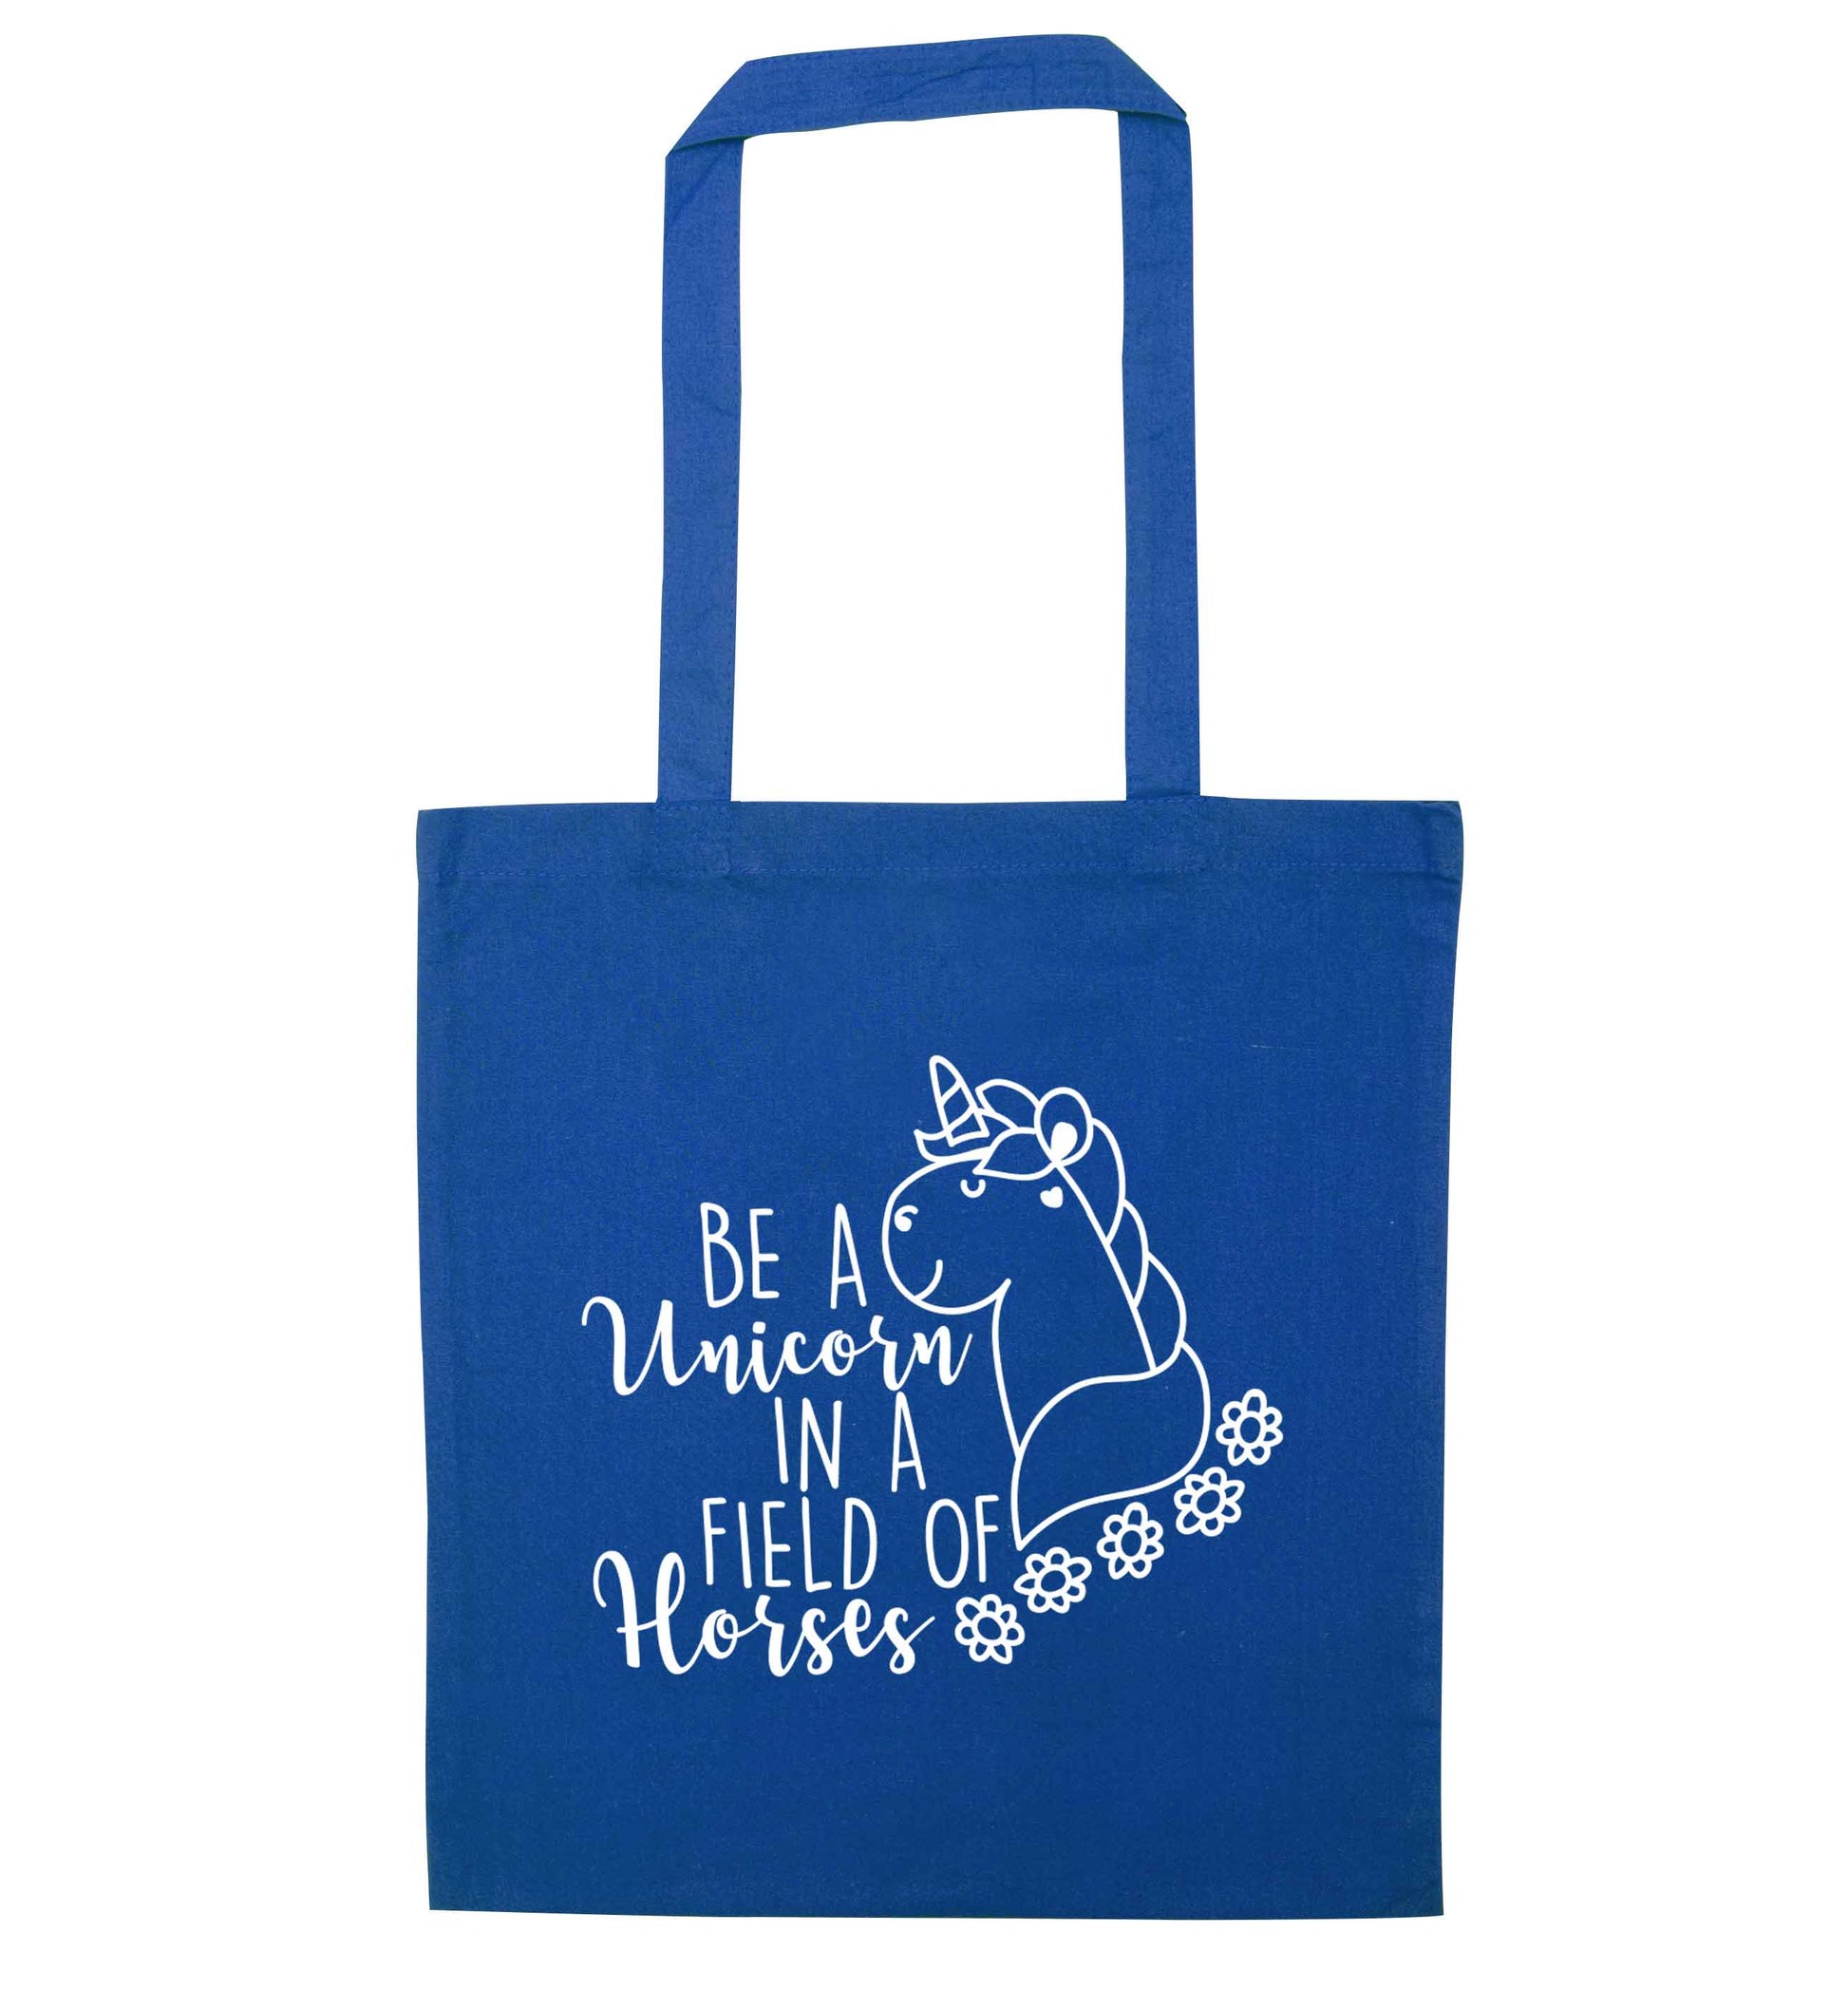 Be a unicorn in a field of horses blue tote bag